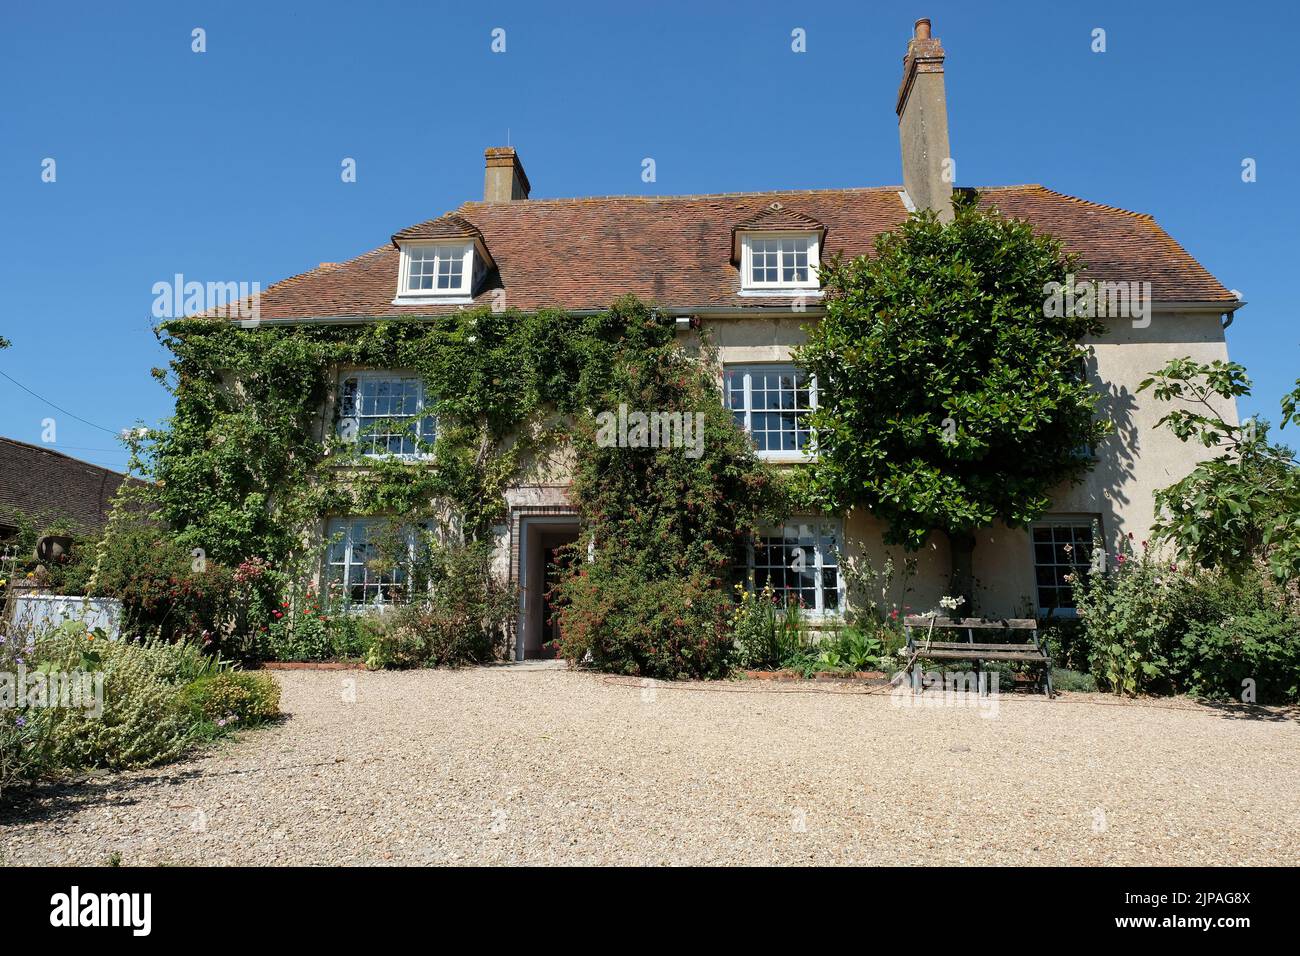 Charleston Farmhouse, near Lewes, East Sussex, England, home of the Bloomsbury Set. It was the country home of Vanessa Bell and Duncan Grant and is an example of their decorative style within a domestic context, representing the fruition of more than sixty years of artistic creativity. Stock Photo